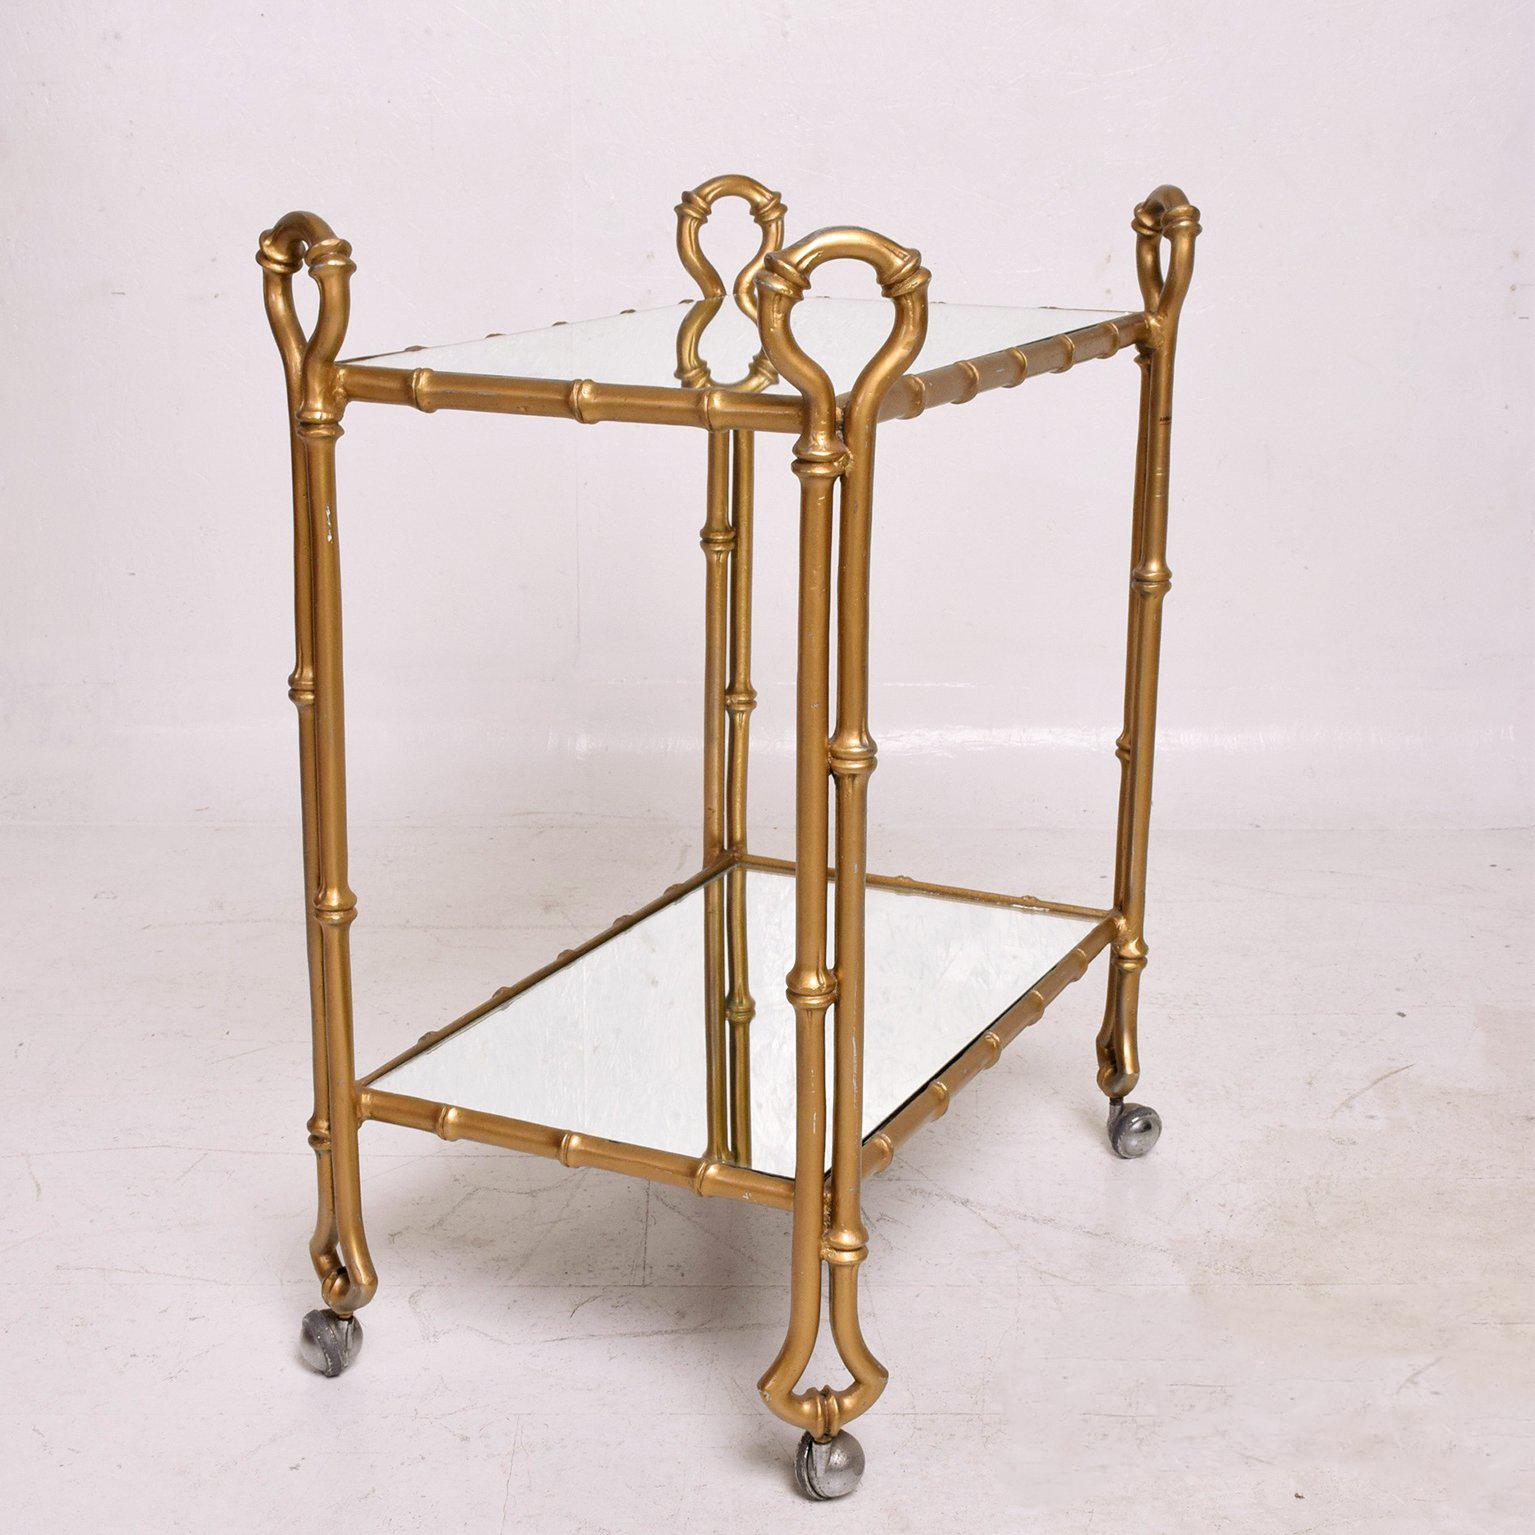 For your consideration a vintage service cart in faux bamboo (cast aluminum) in gold finish with new mirror shelves.

Finish has vintage wear and scuffs. It could be restored to meet customer specifications. 

Mexico circa 1950s. Unmarked. No